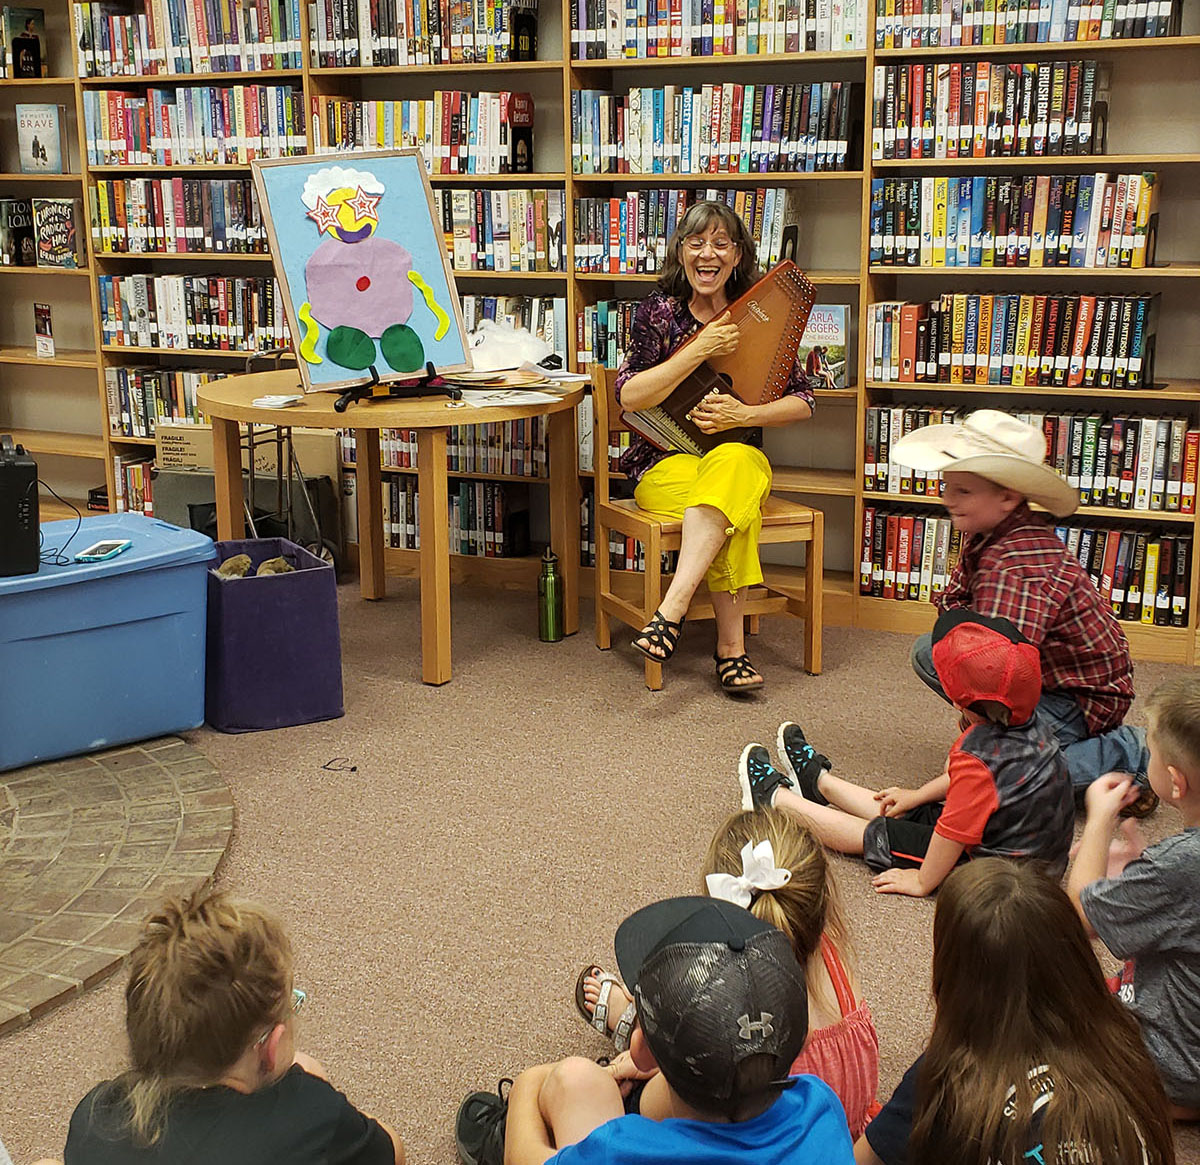 A woman plays an instrument in a library surrounded by children